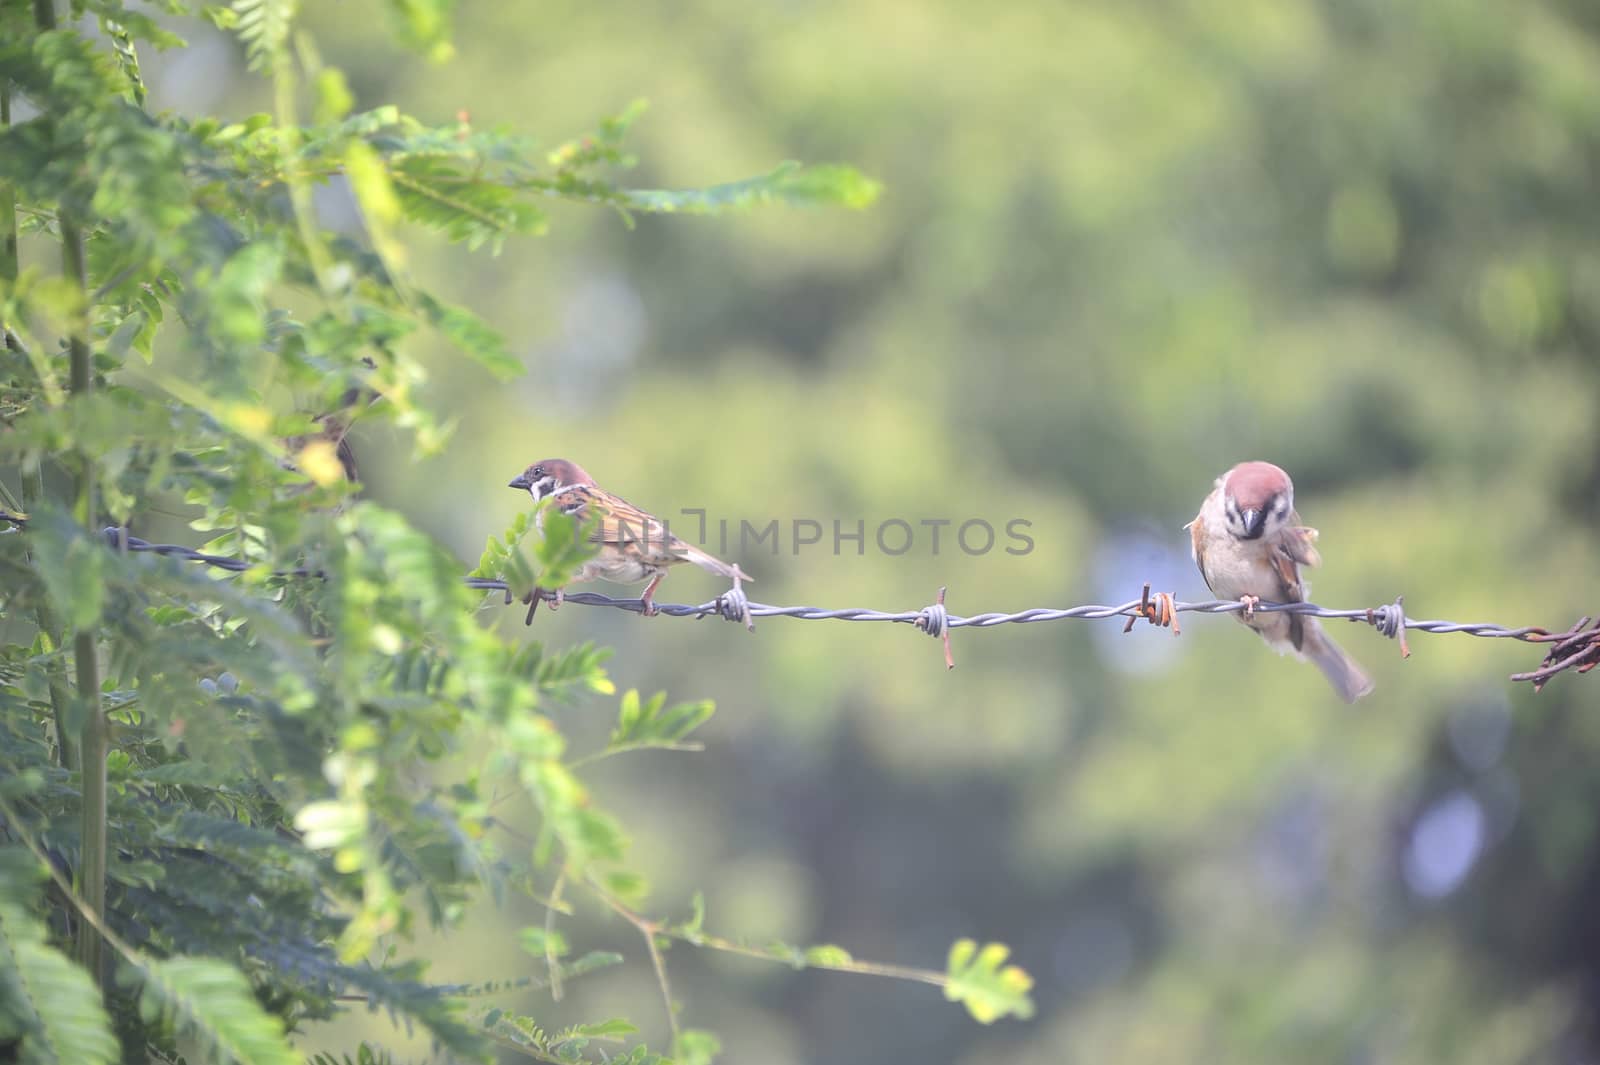 An Bird sparrow in nature place .